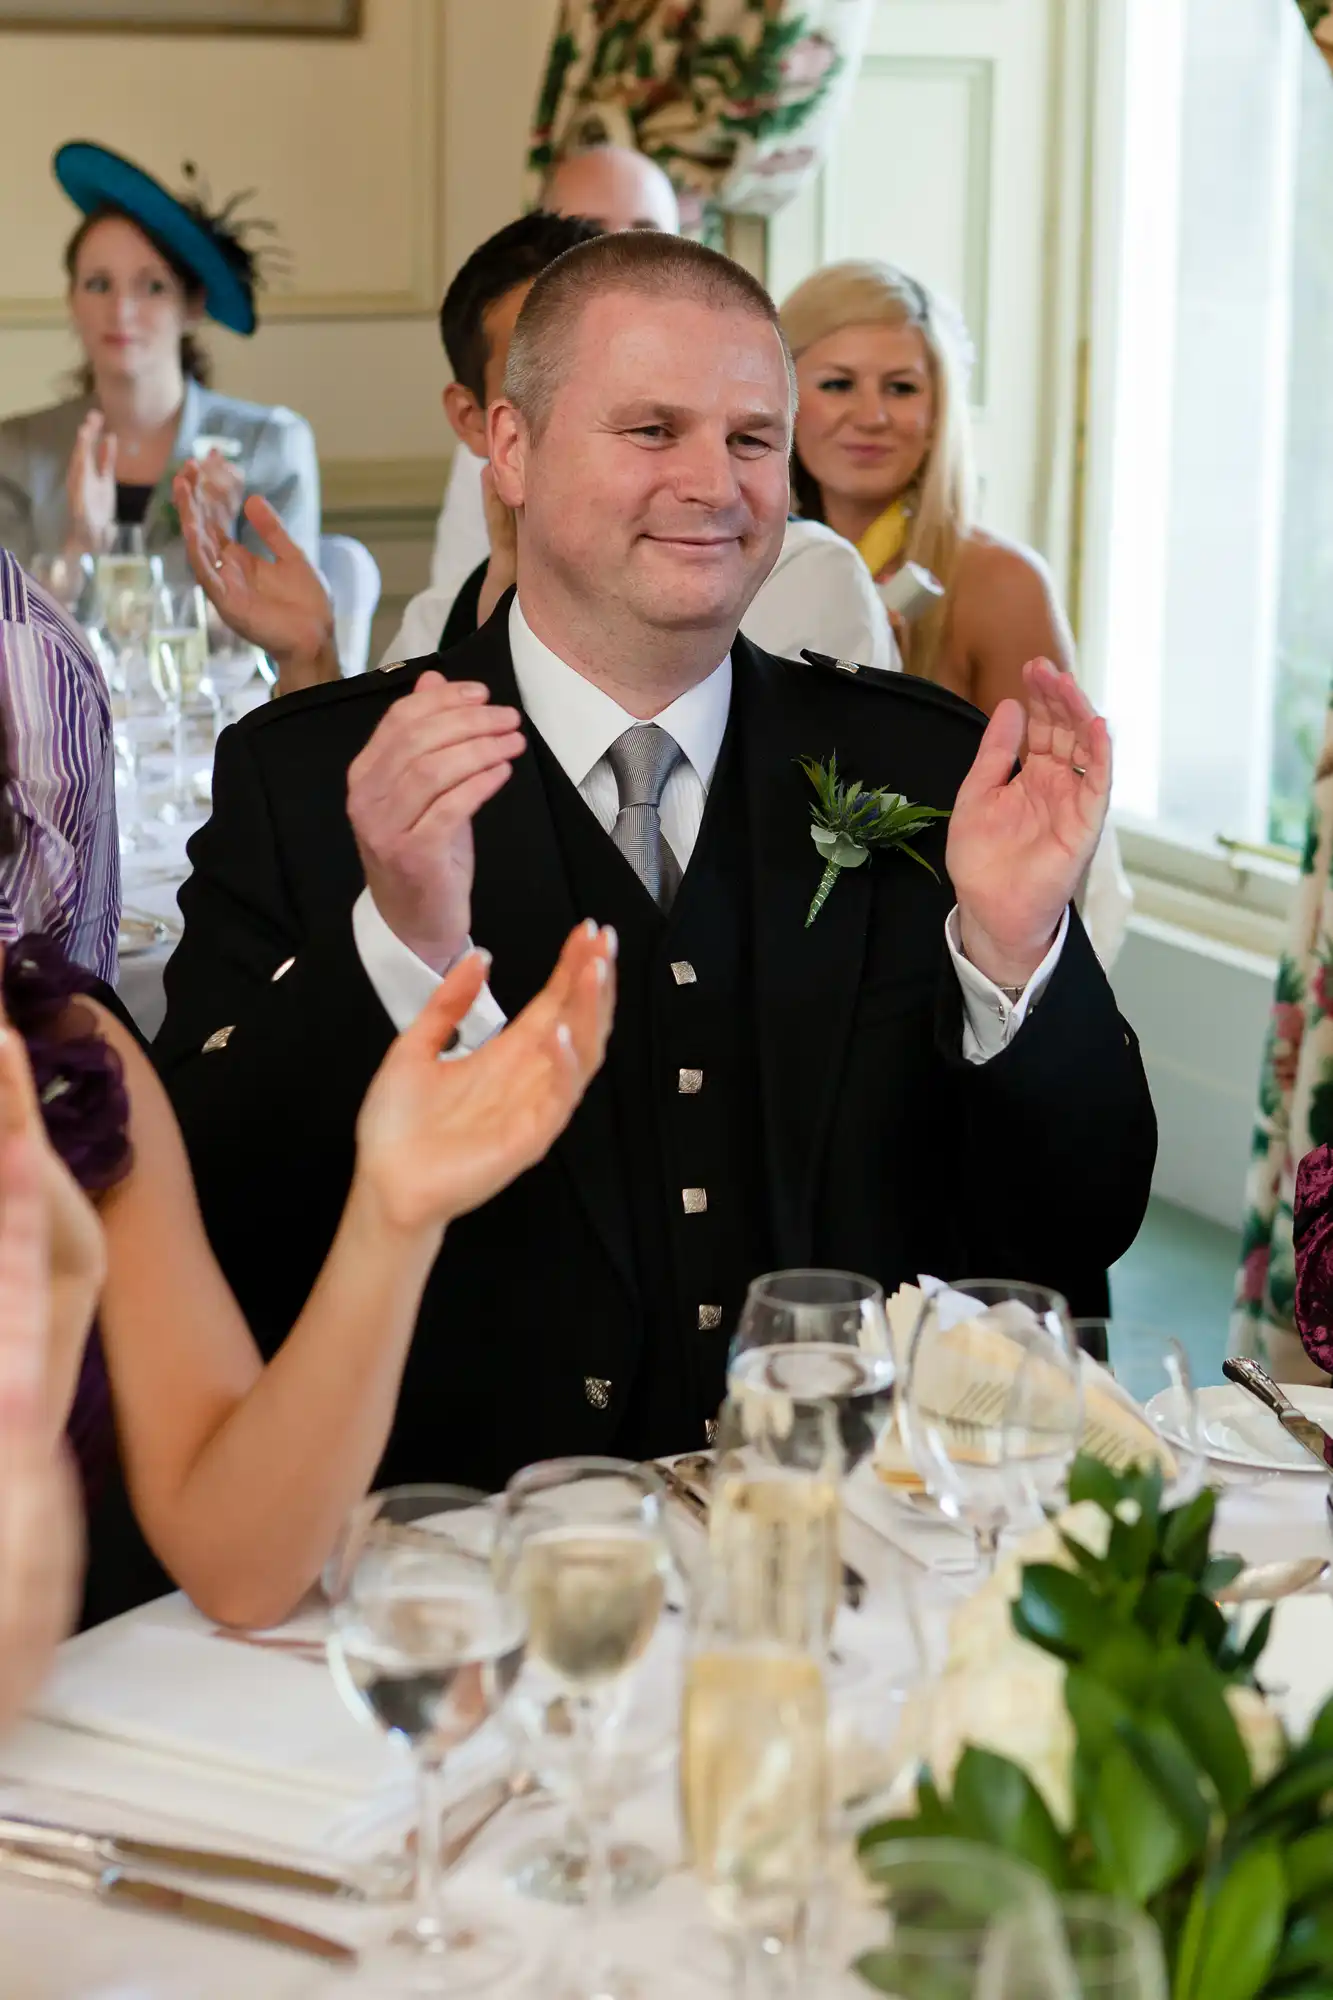 Man in formal attire with a boutonniere, clapping at a dining table during an event, with guests in the background.